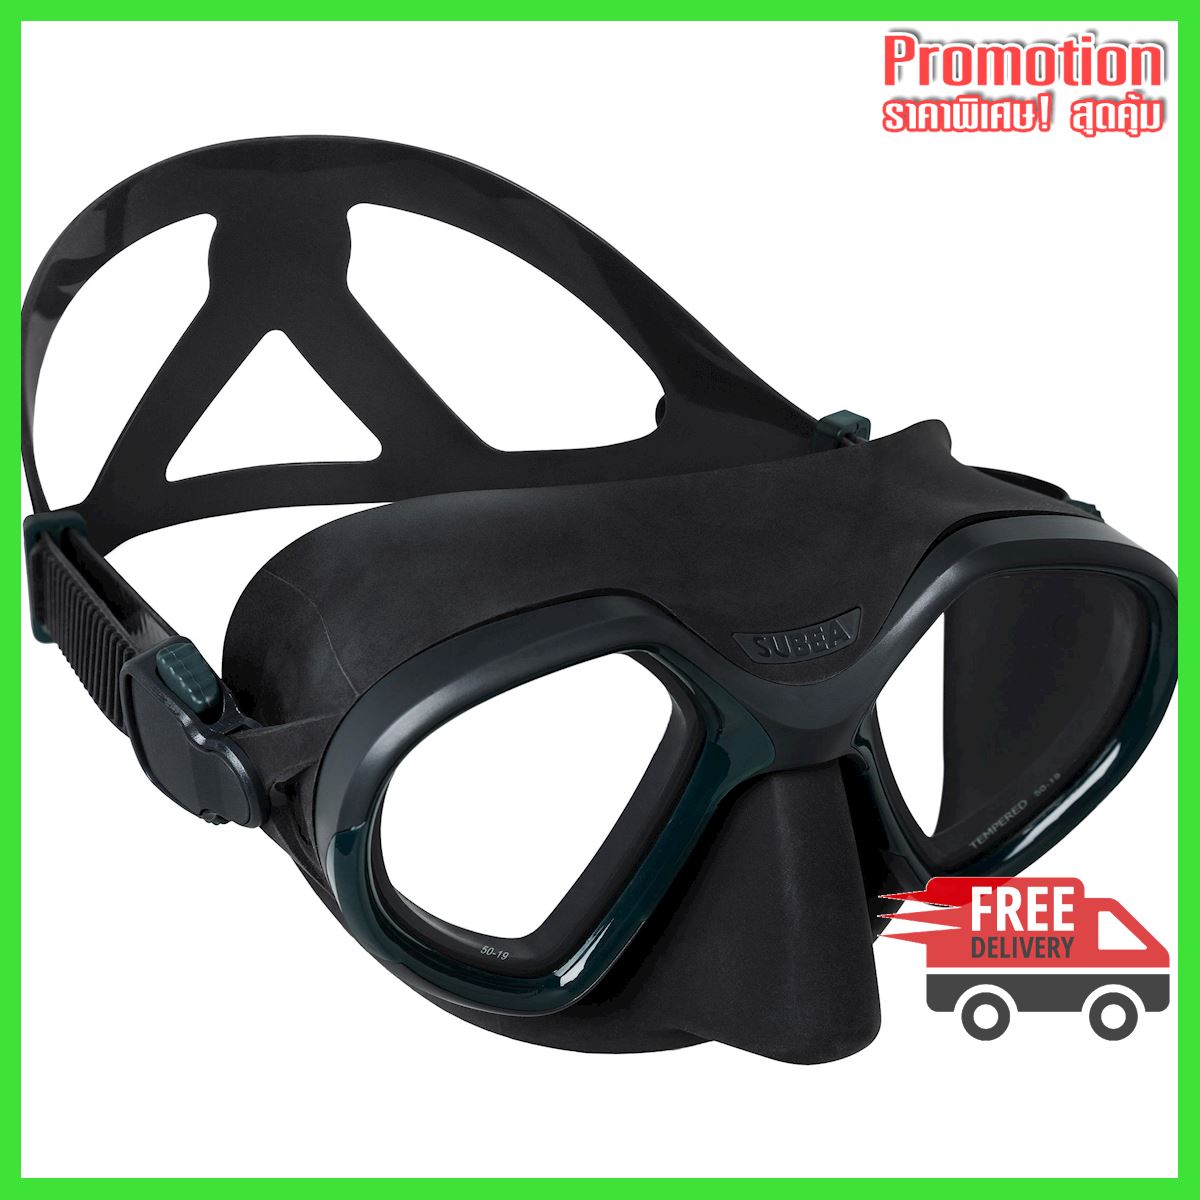 Spearfishing Dual-lens Mask SPF 500 confirmed